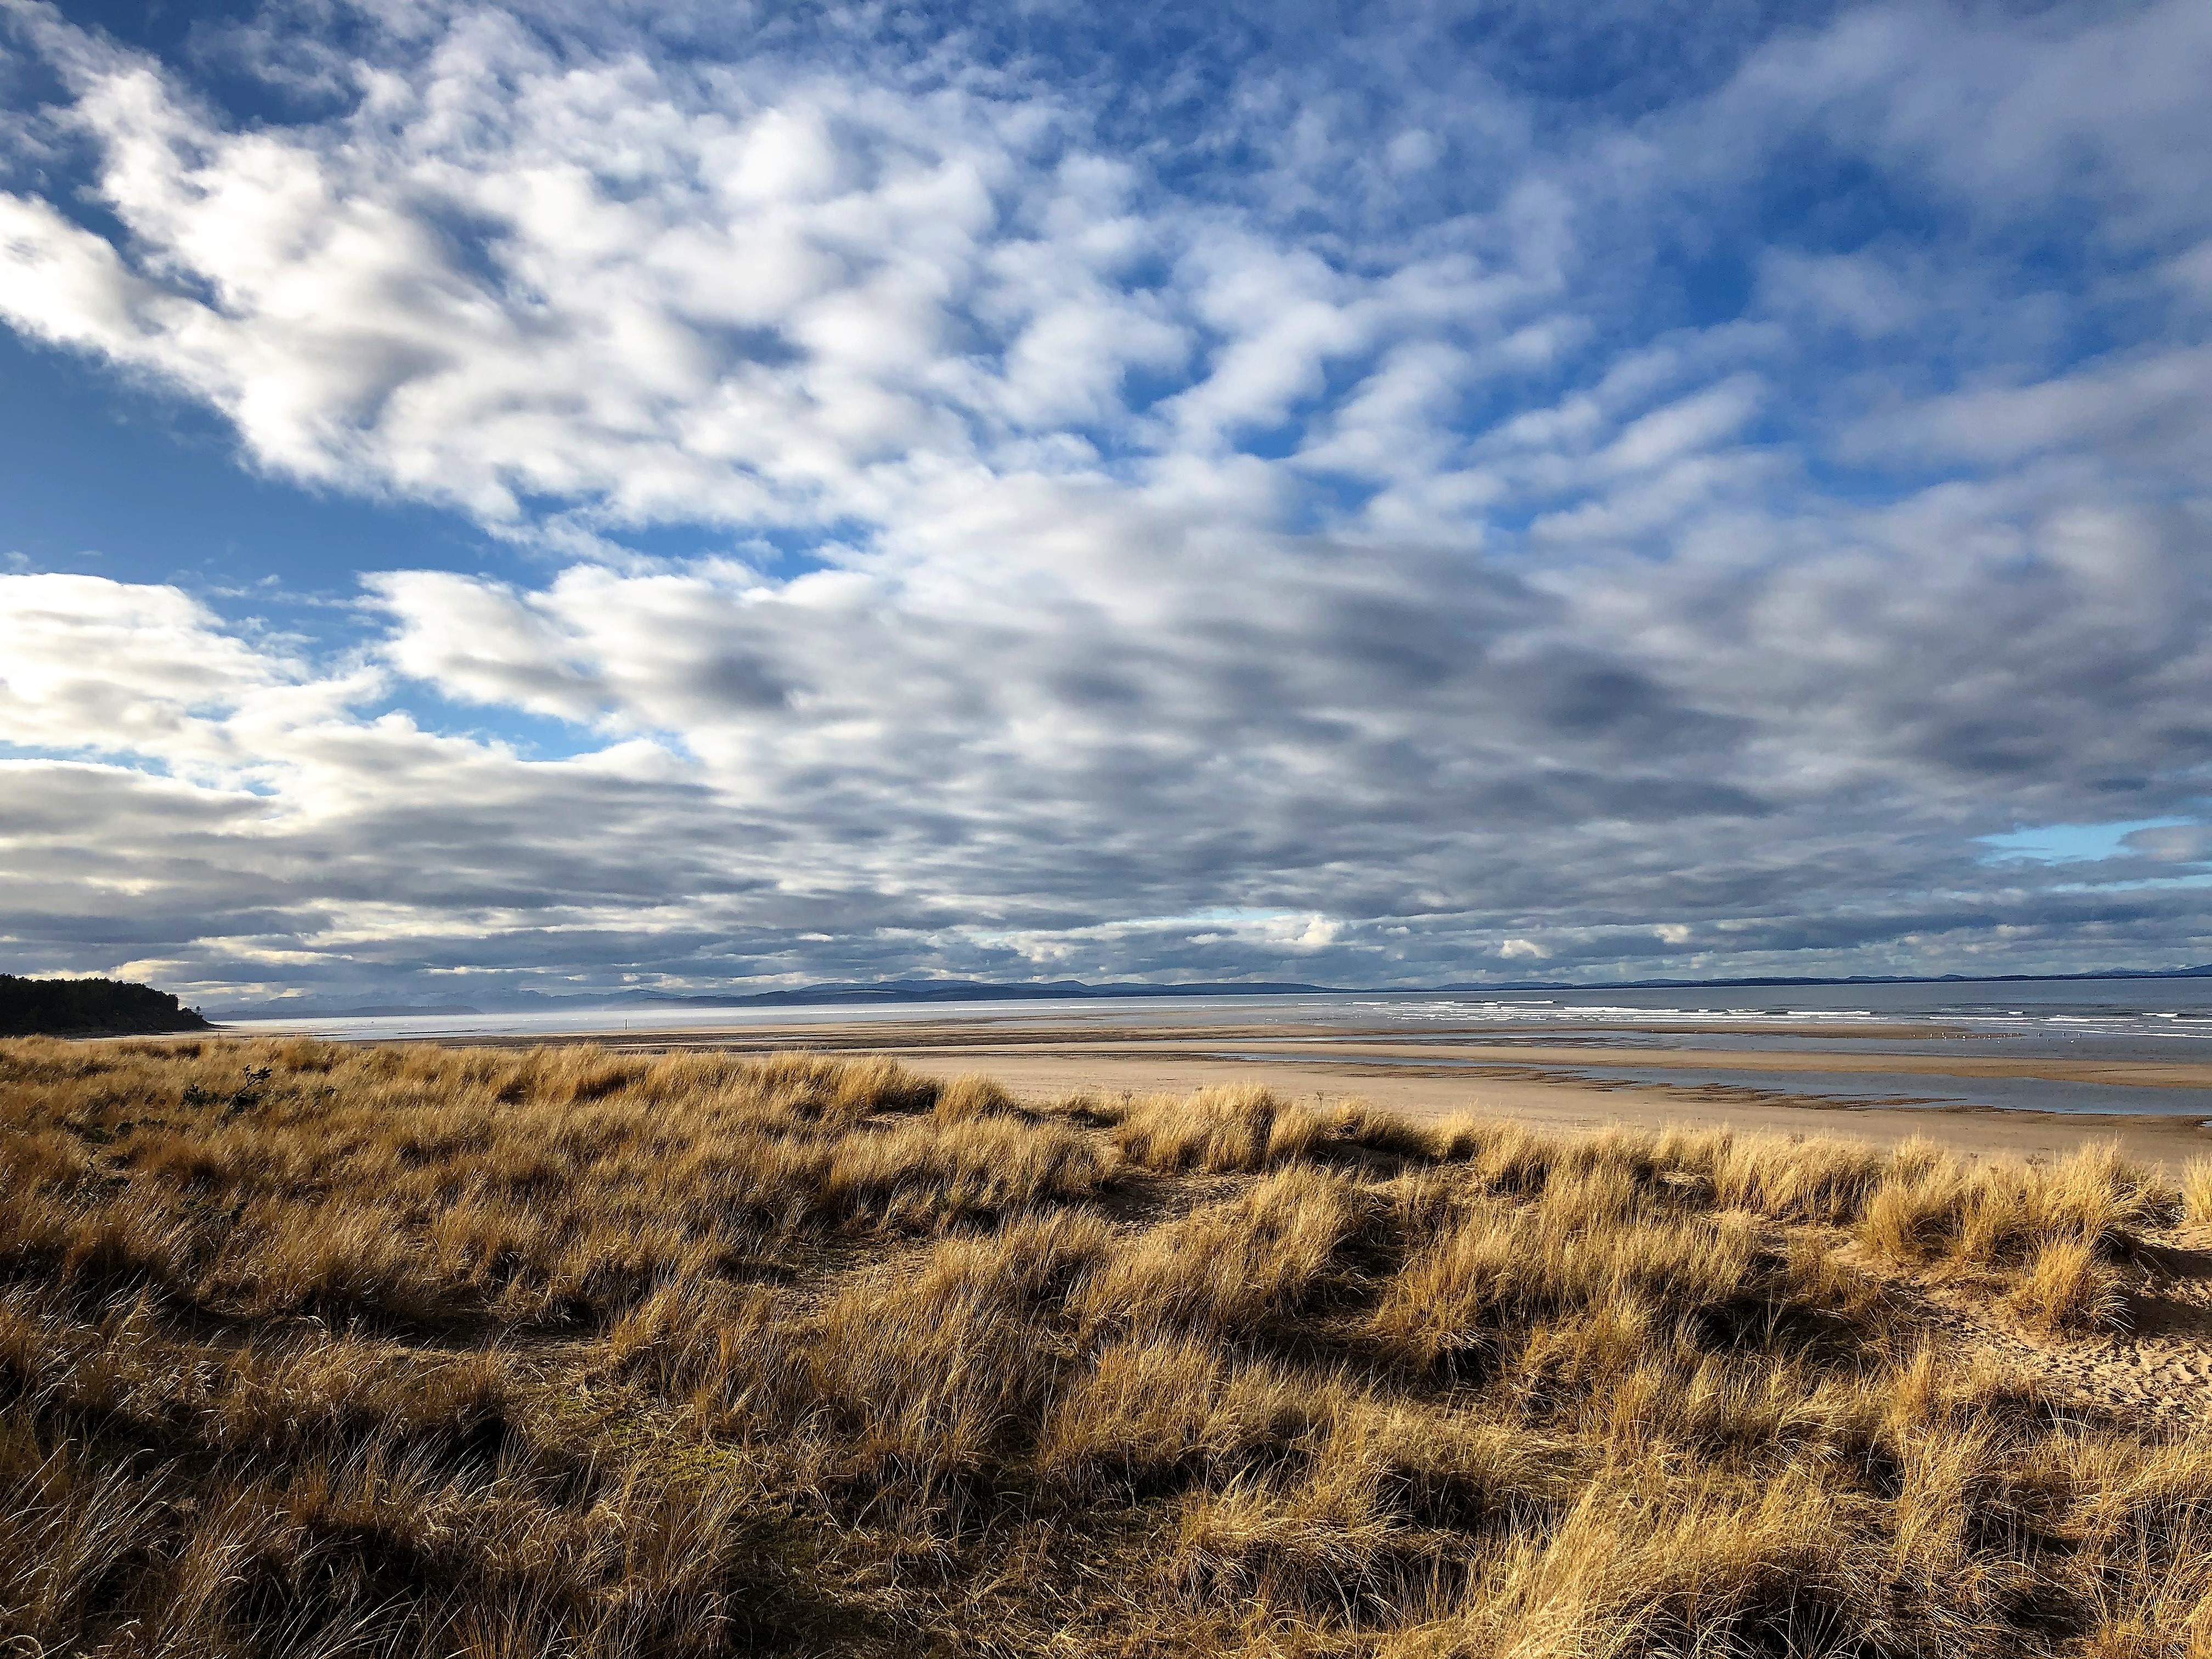 The sand dunes of Findhorn Beach